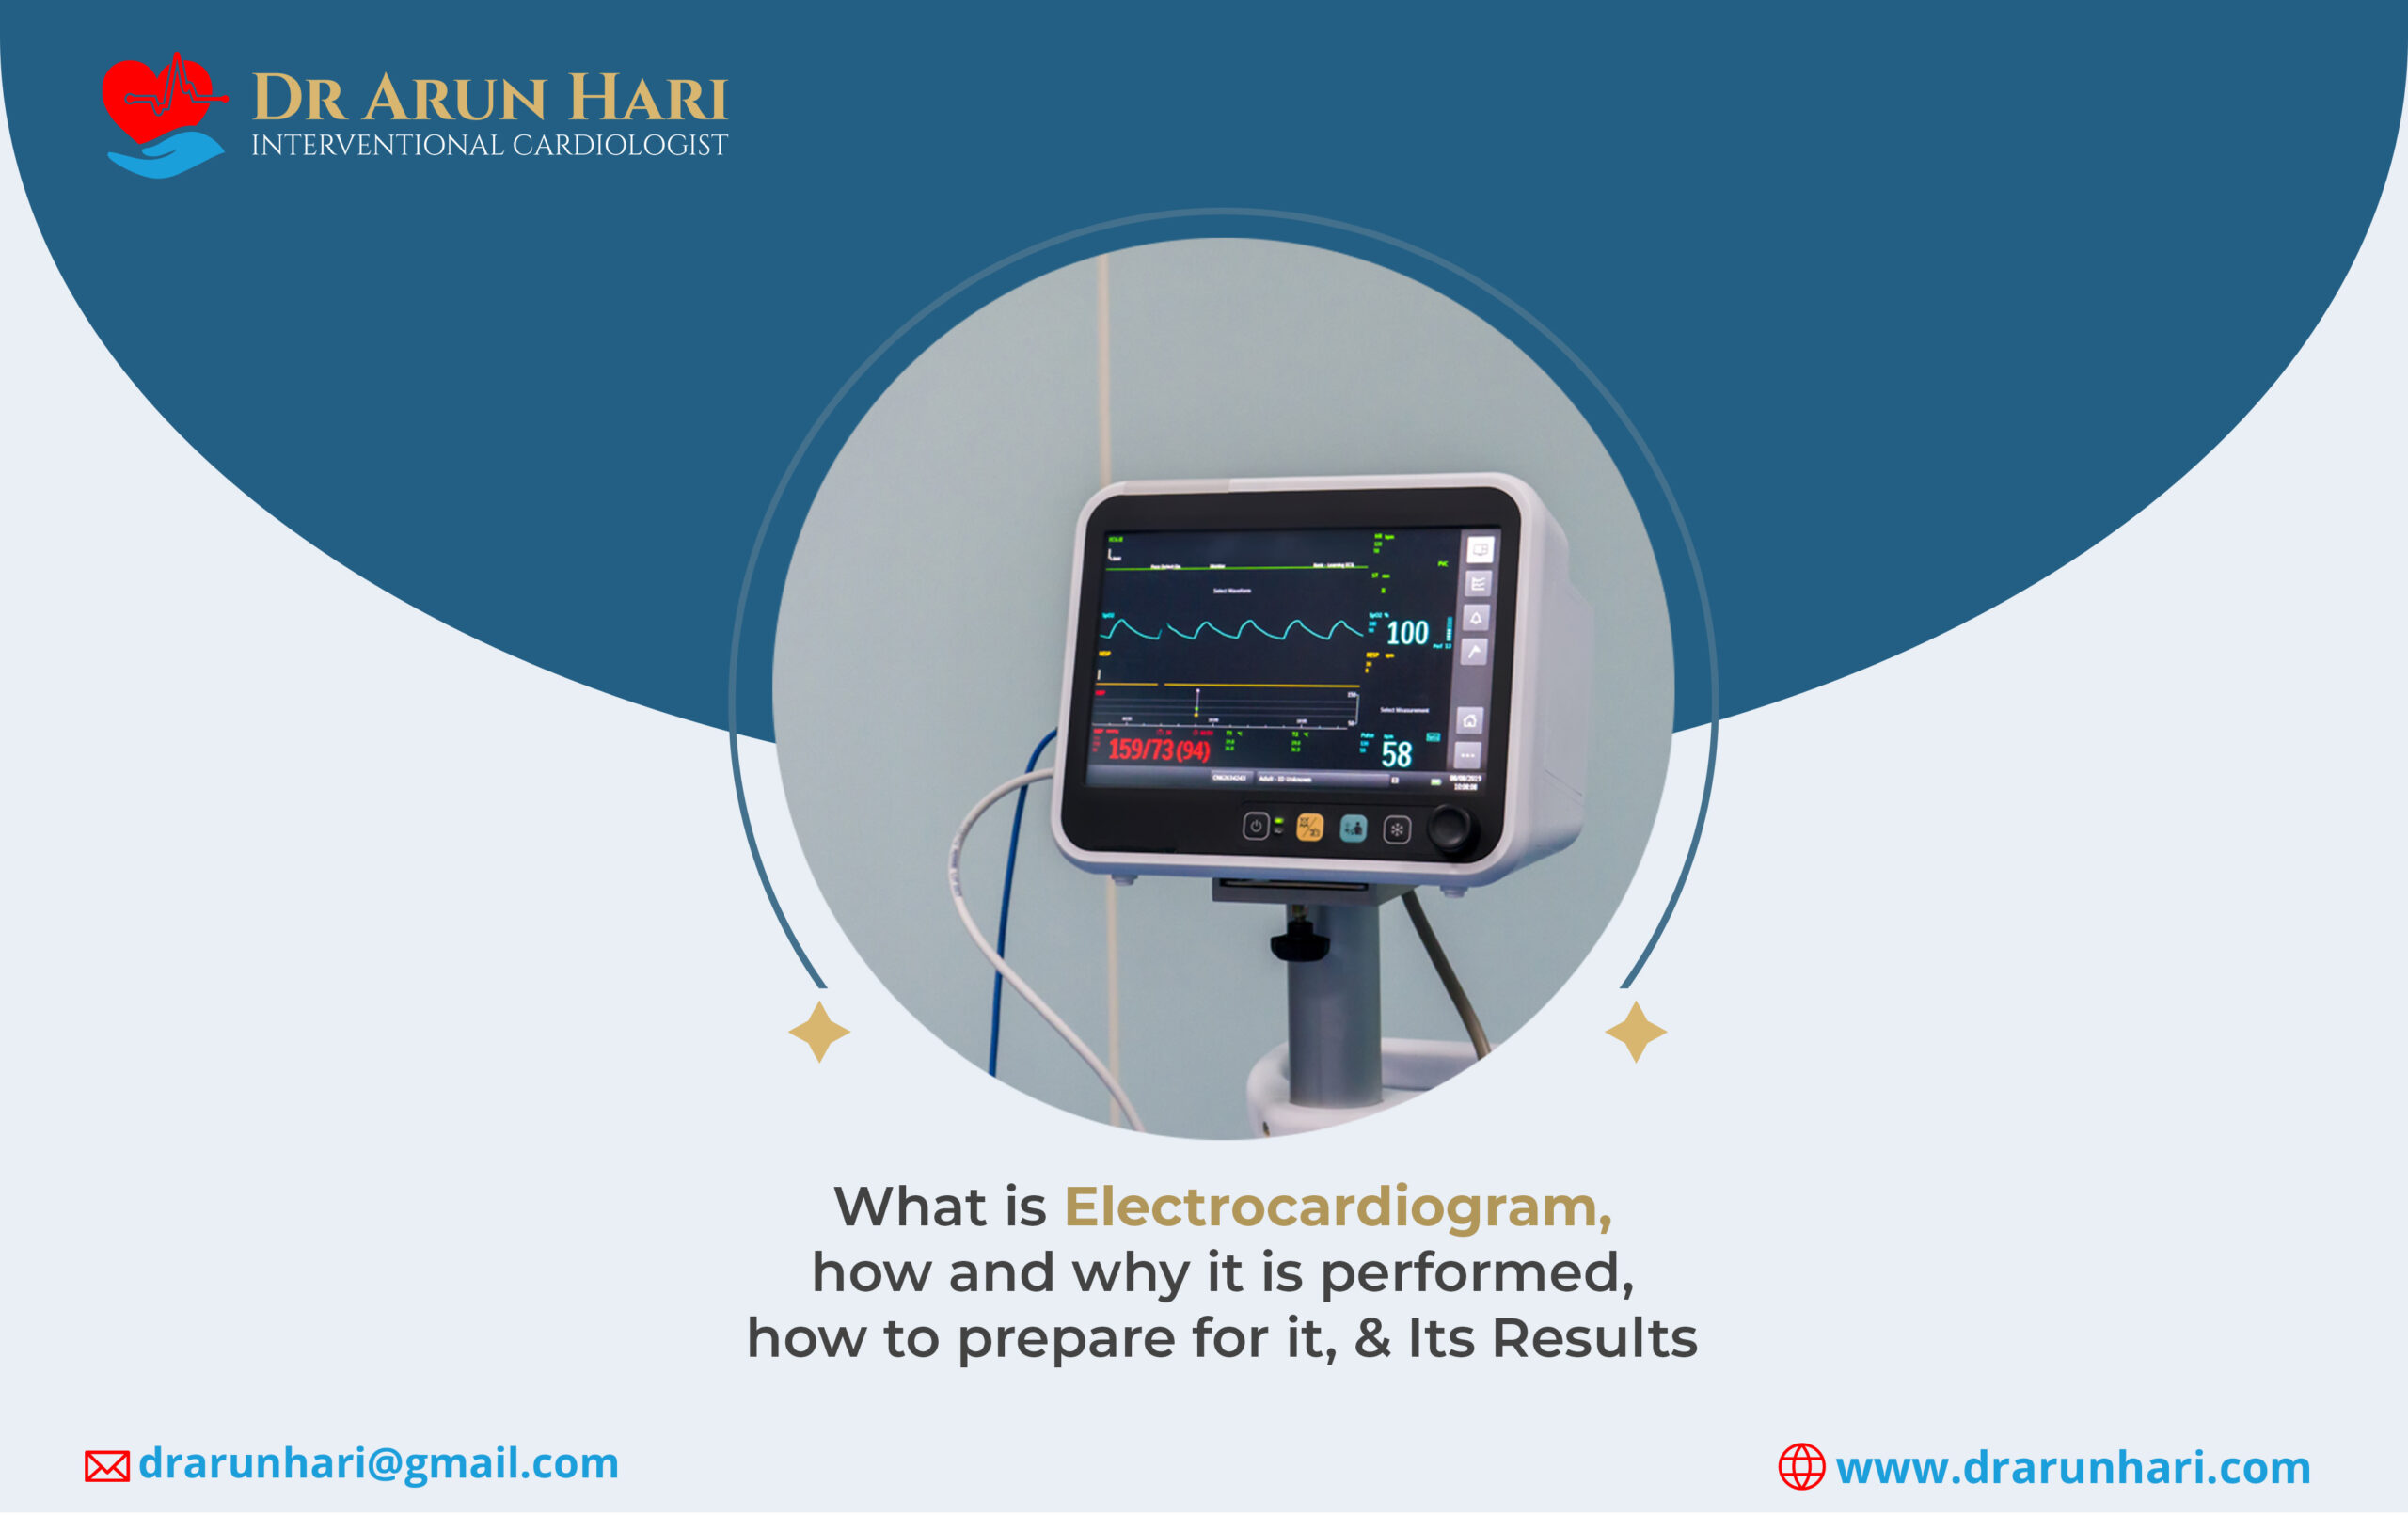 You are currently viewing Electrocardiogram – How & Why It Is Performed, How to Prepare, & Results